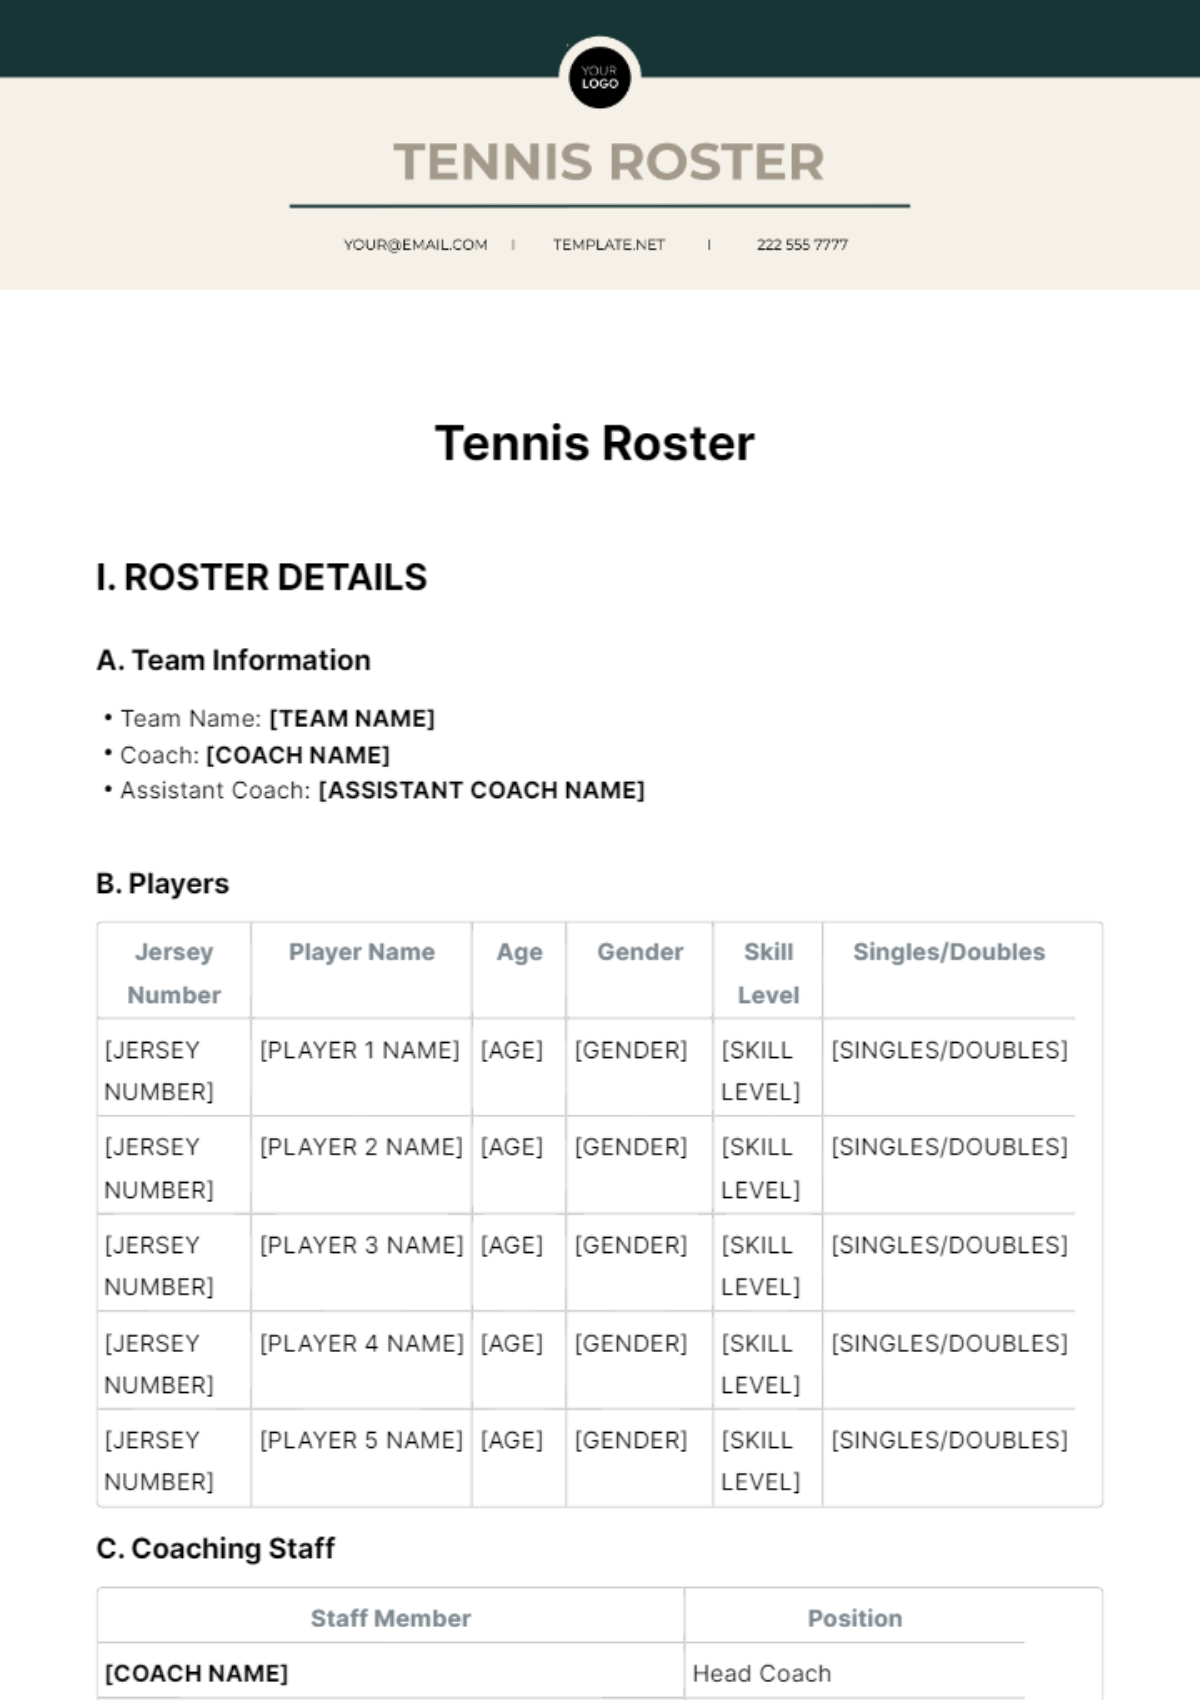 Tennis Roster Template